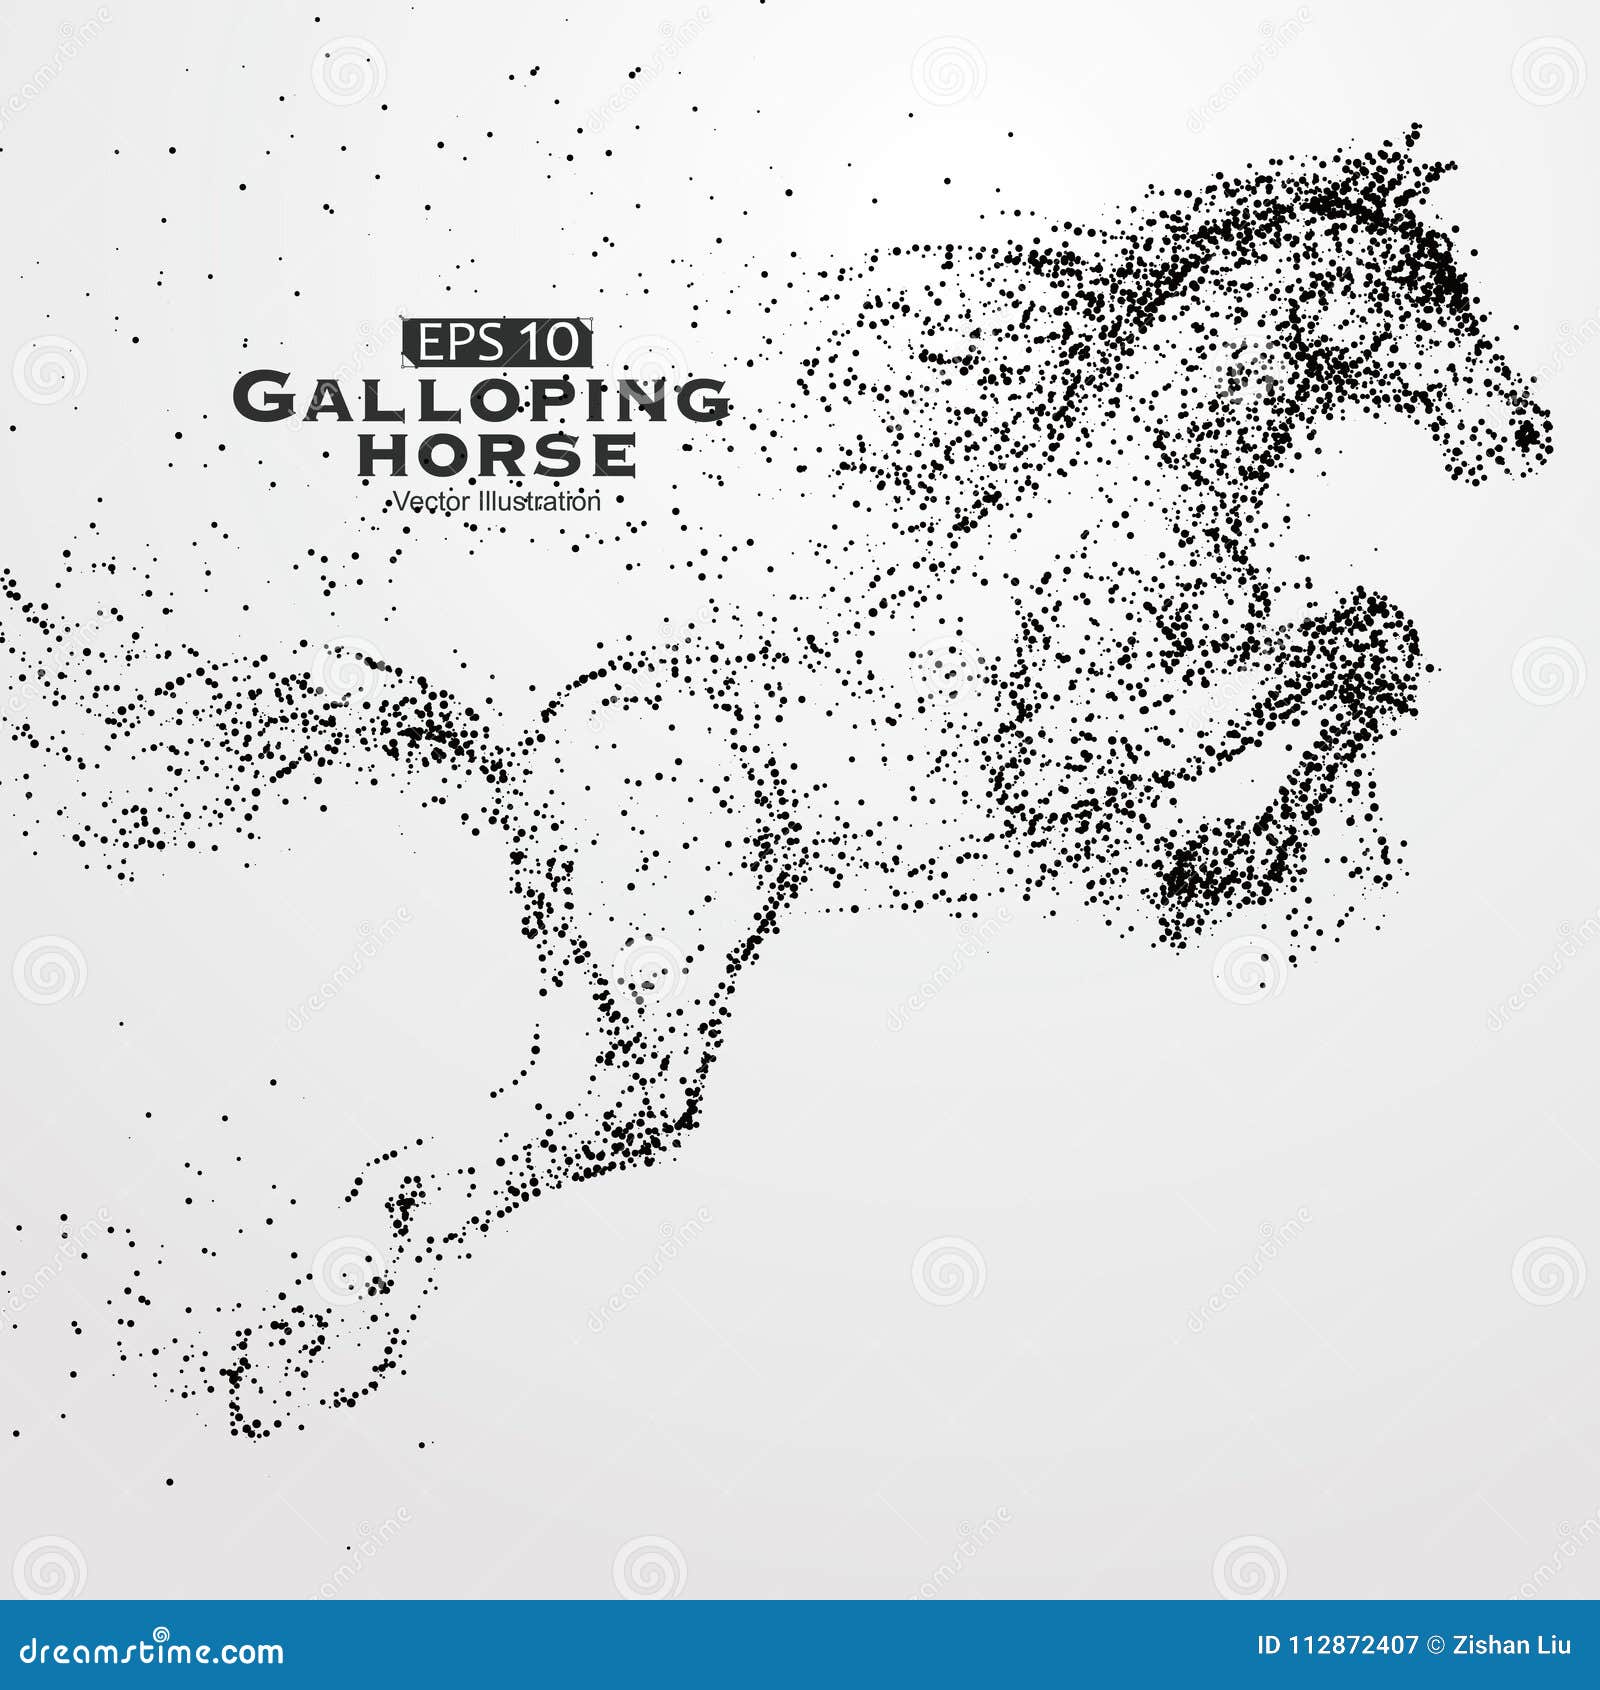 galloping horse,many particles,sketch, ,the moral development and progress.